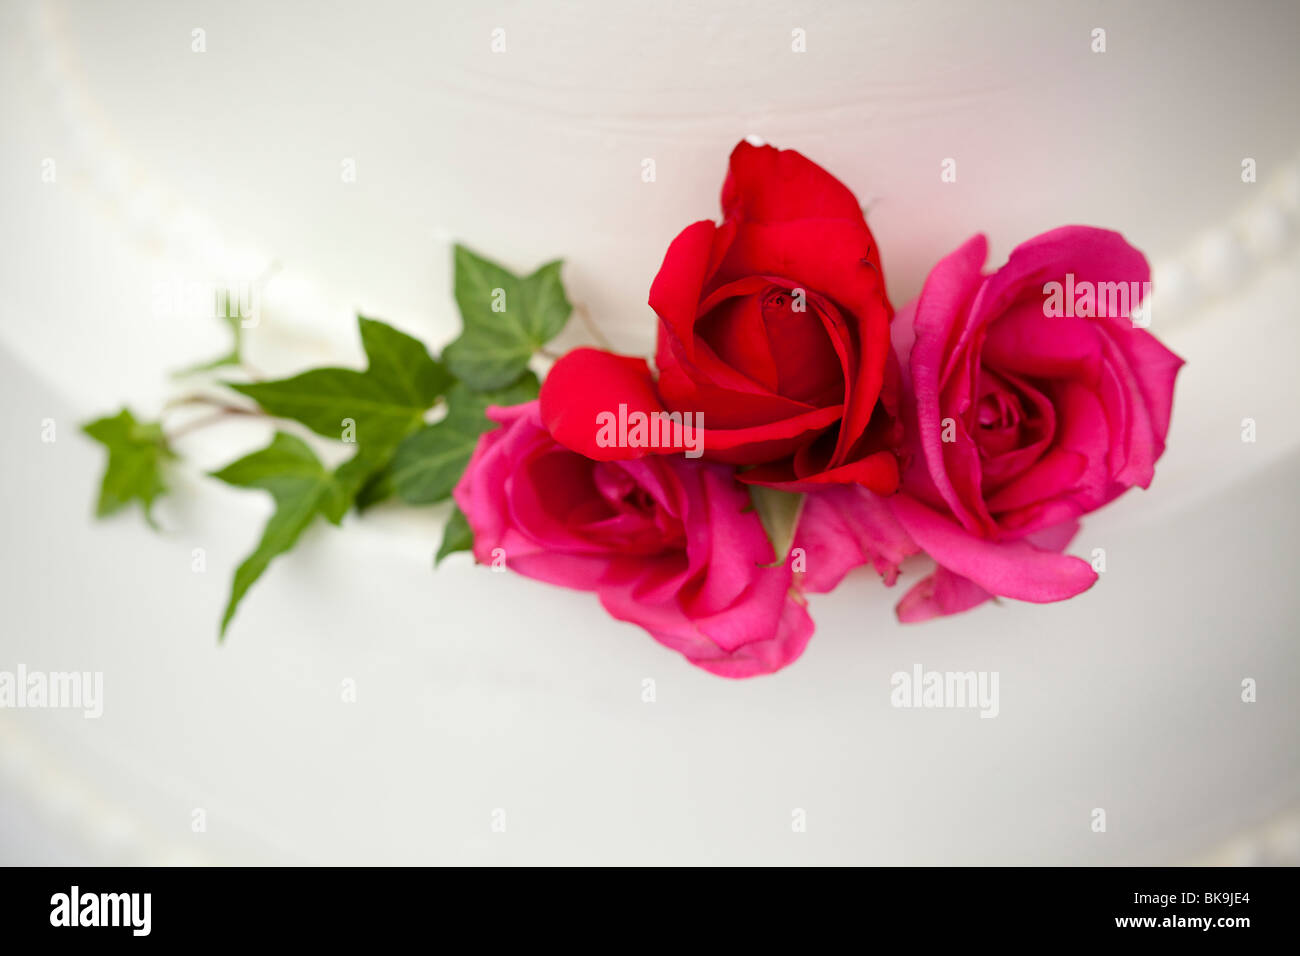 red and pink rose cake decoration Stock Photo